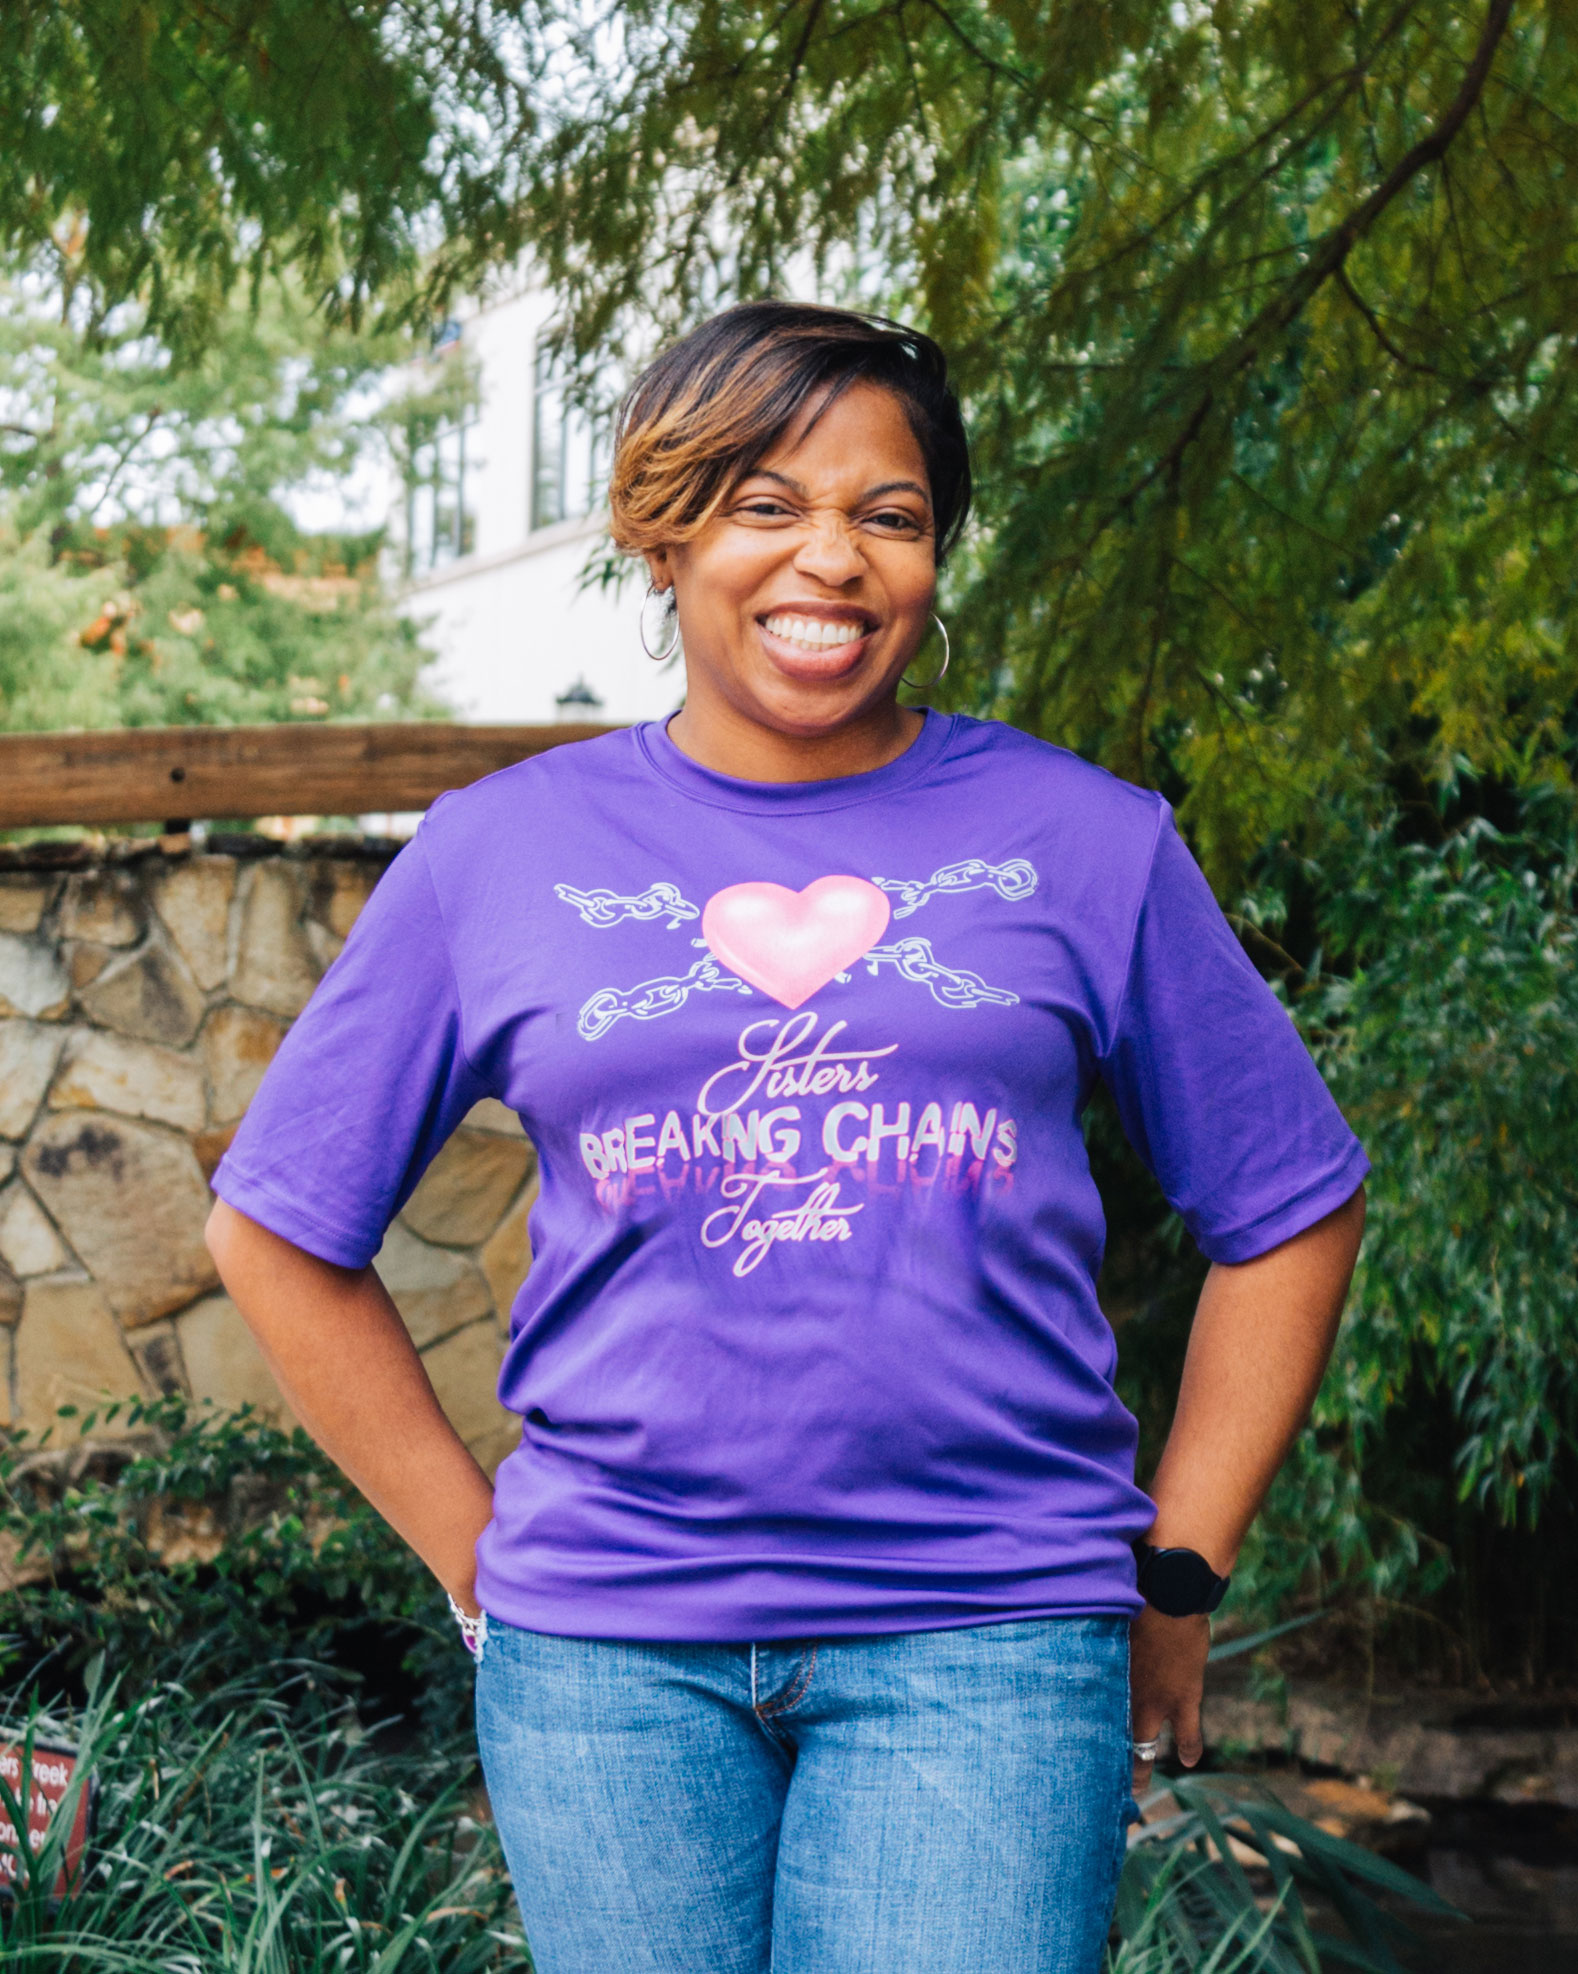 Bree Covington, founder of Sisters Breaking Chains Together